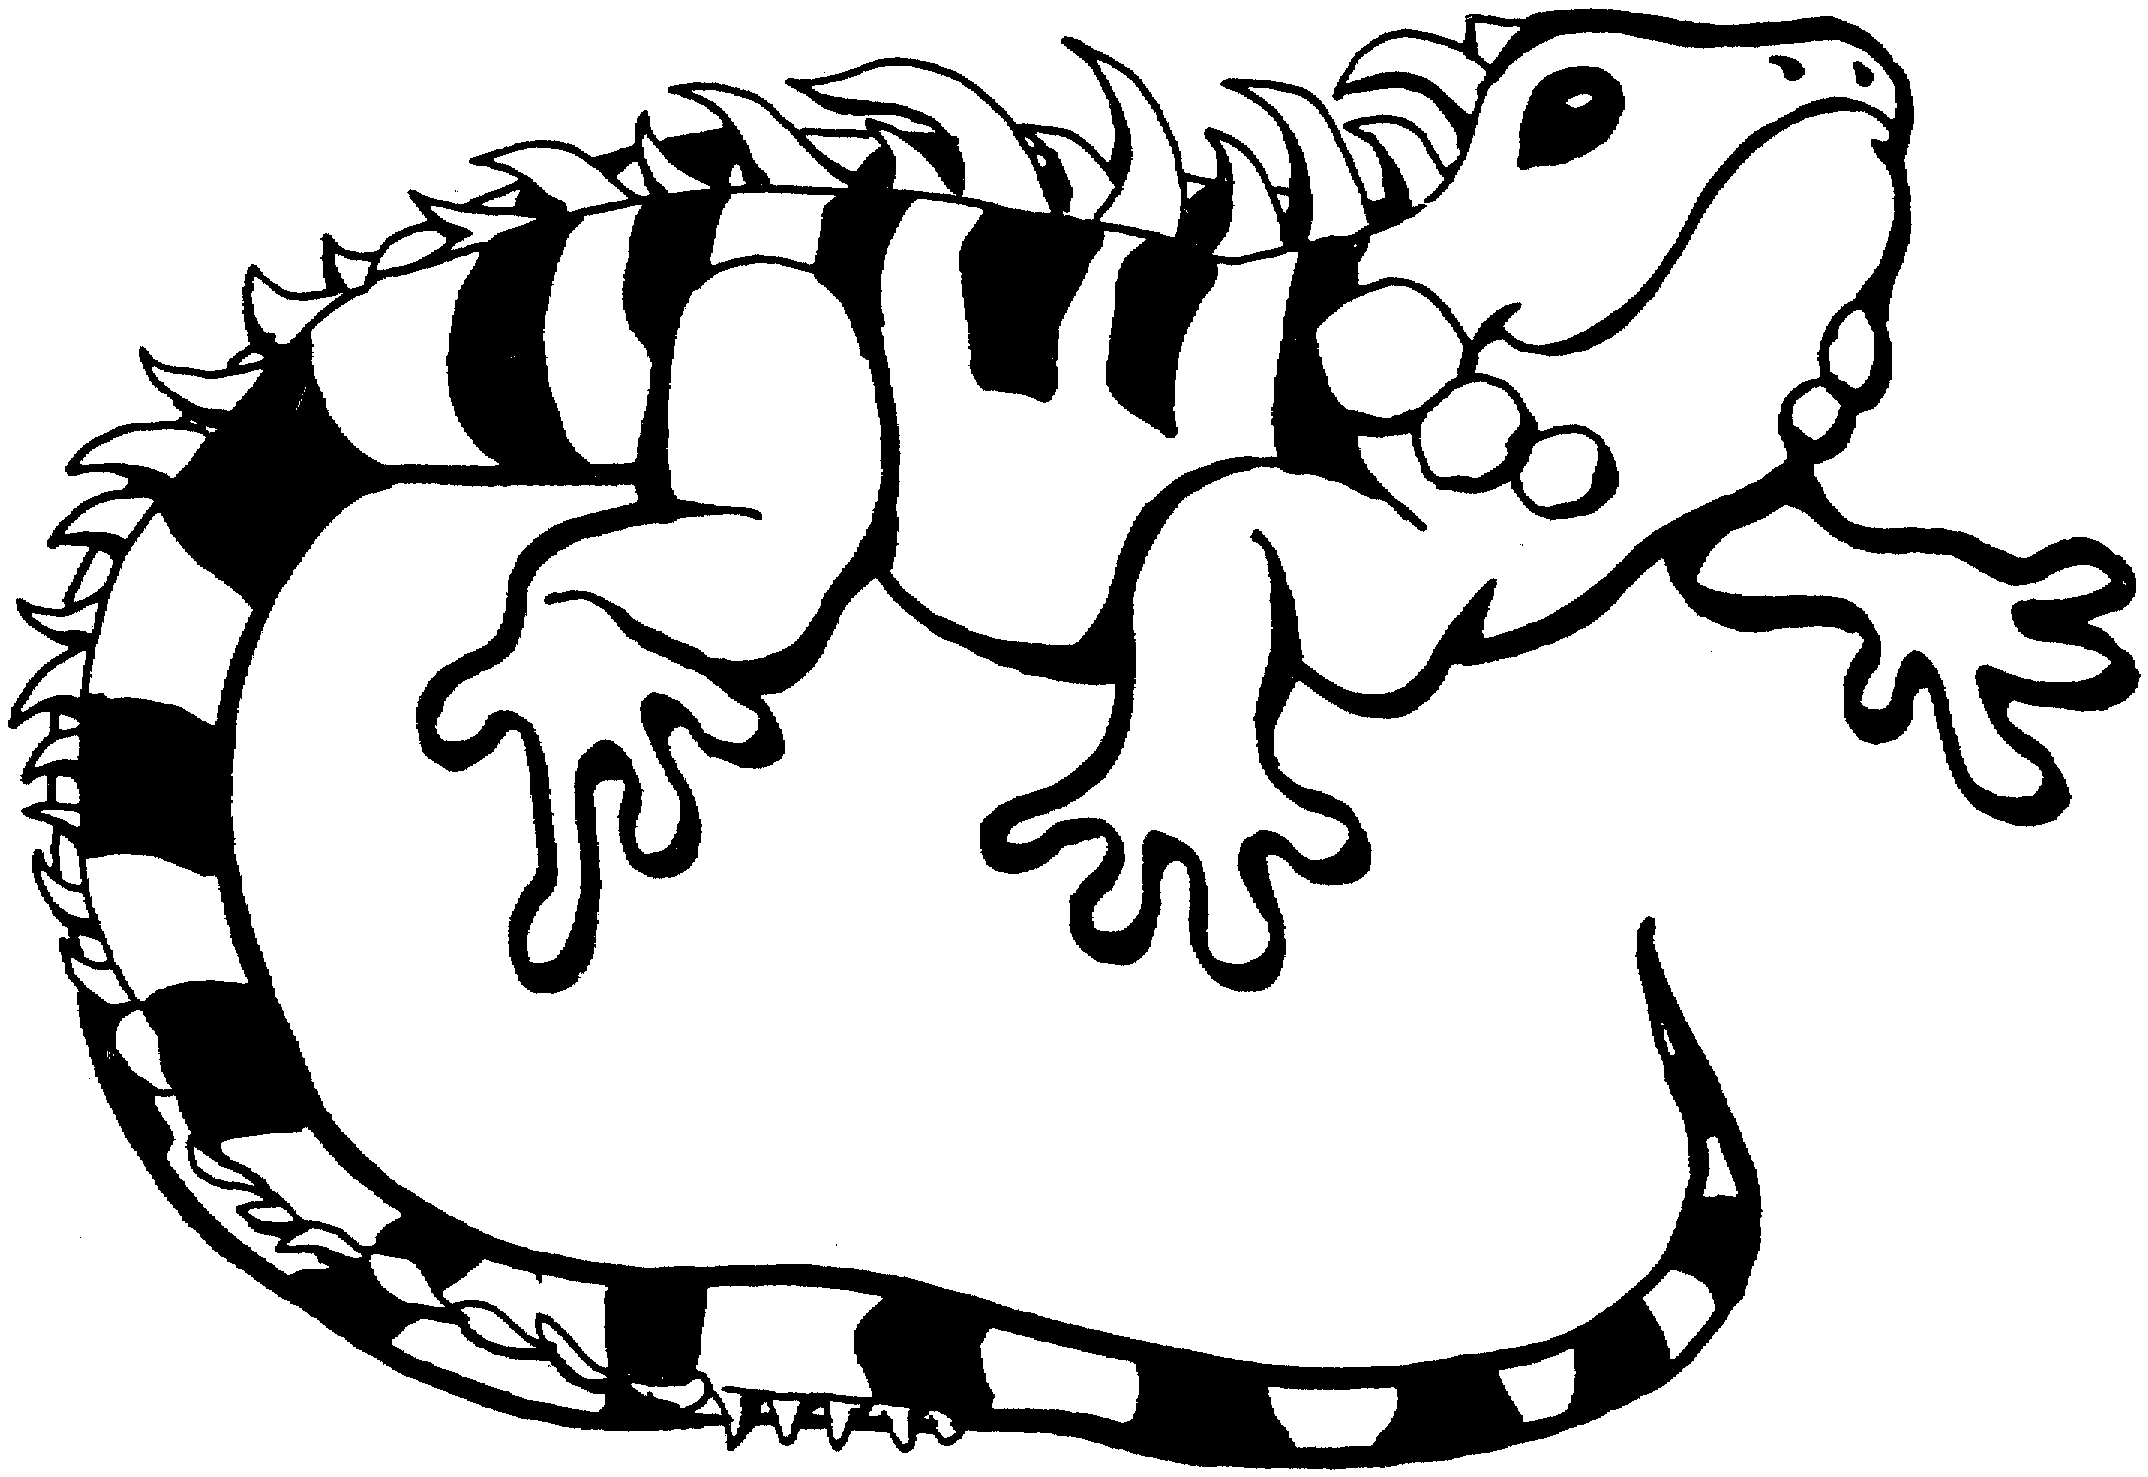 iguana coloring pages printable